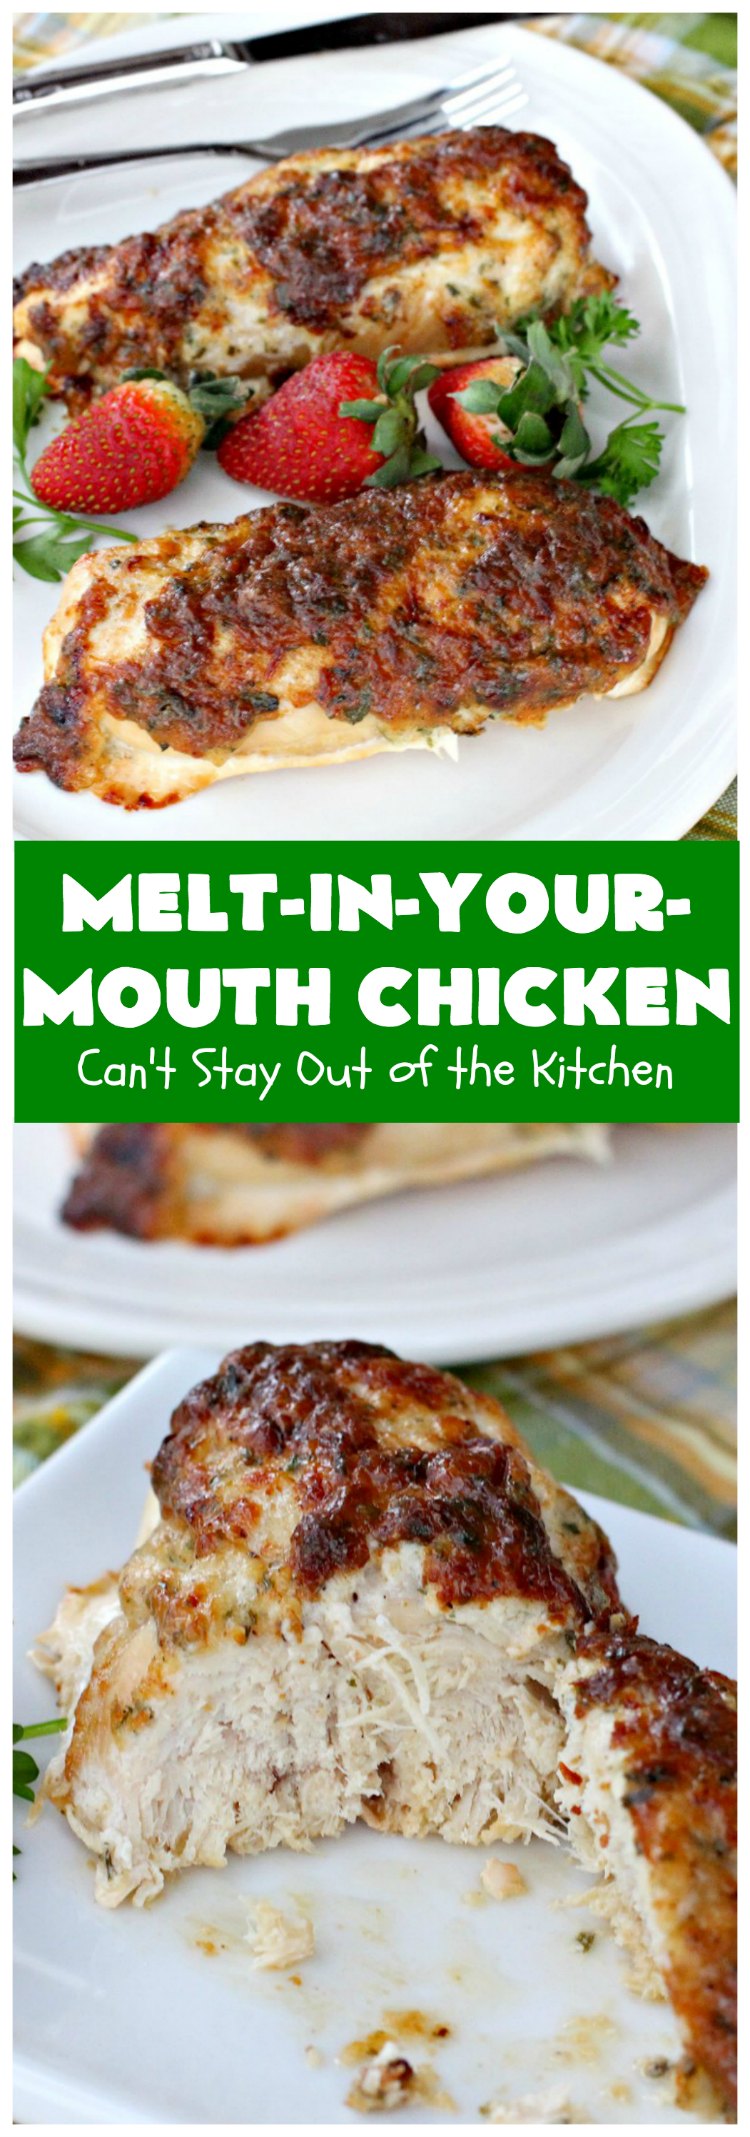 Melt-In-Your-Mouth Chicken - Can't Stay Out of the Kitchen